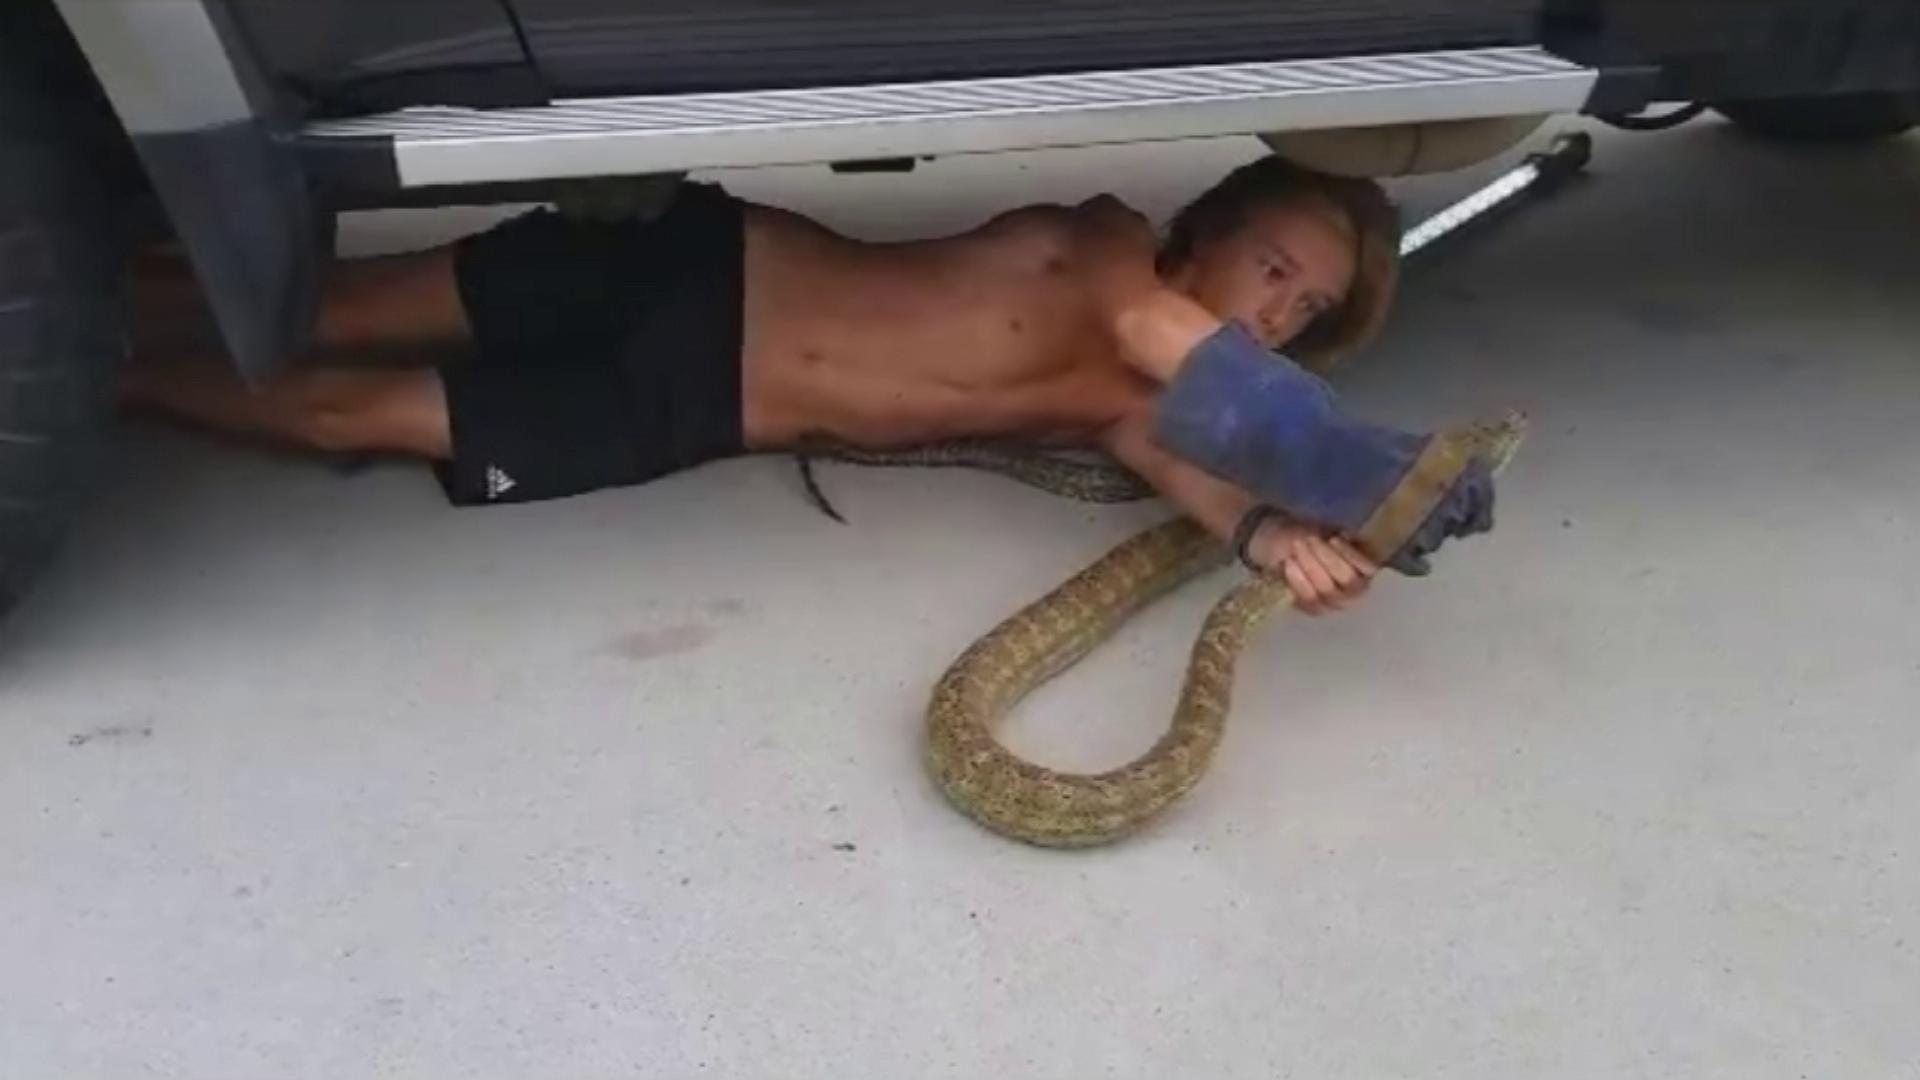 Golf fans react to HILARIOUS FAKE SNAKE prank on the golf course! |  GolfMagic